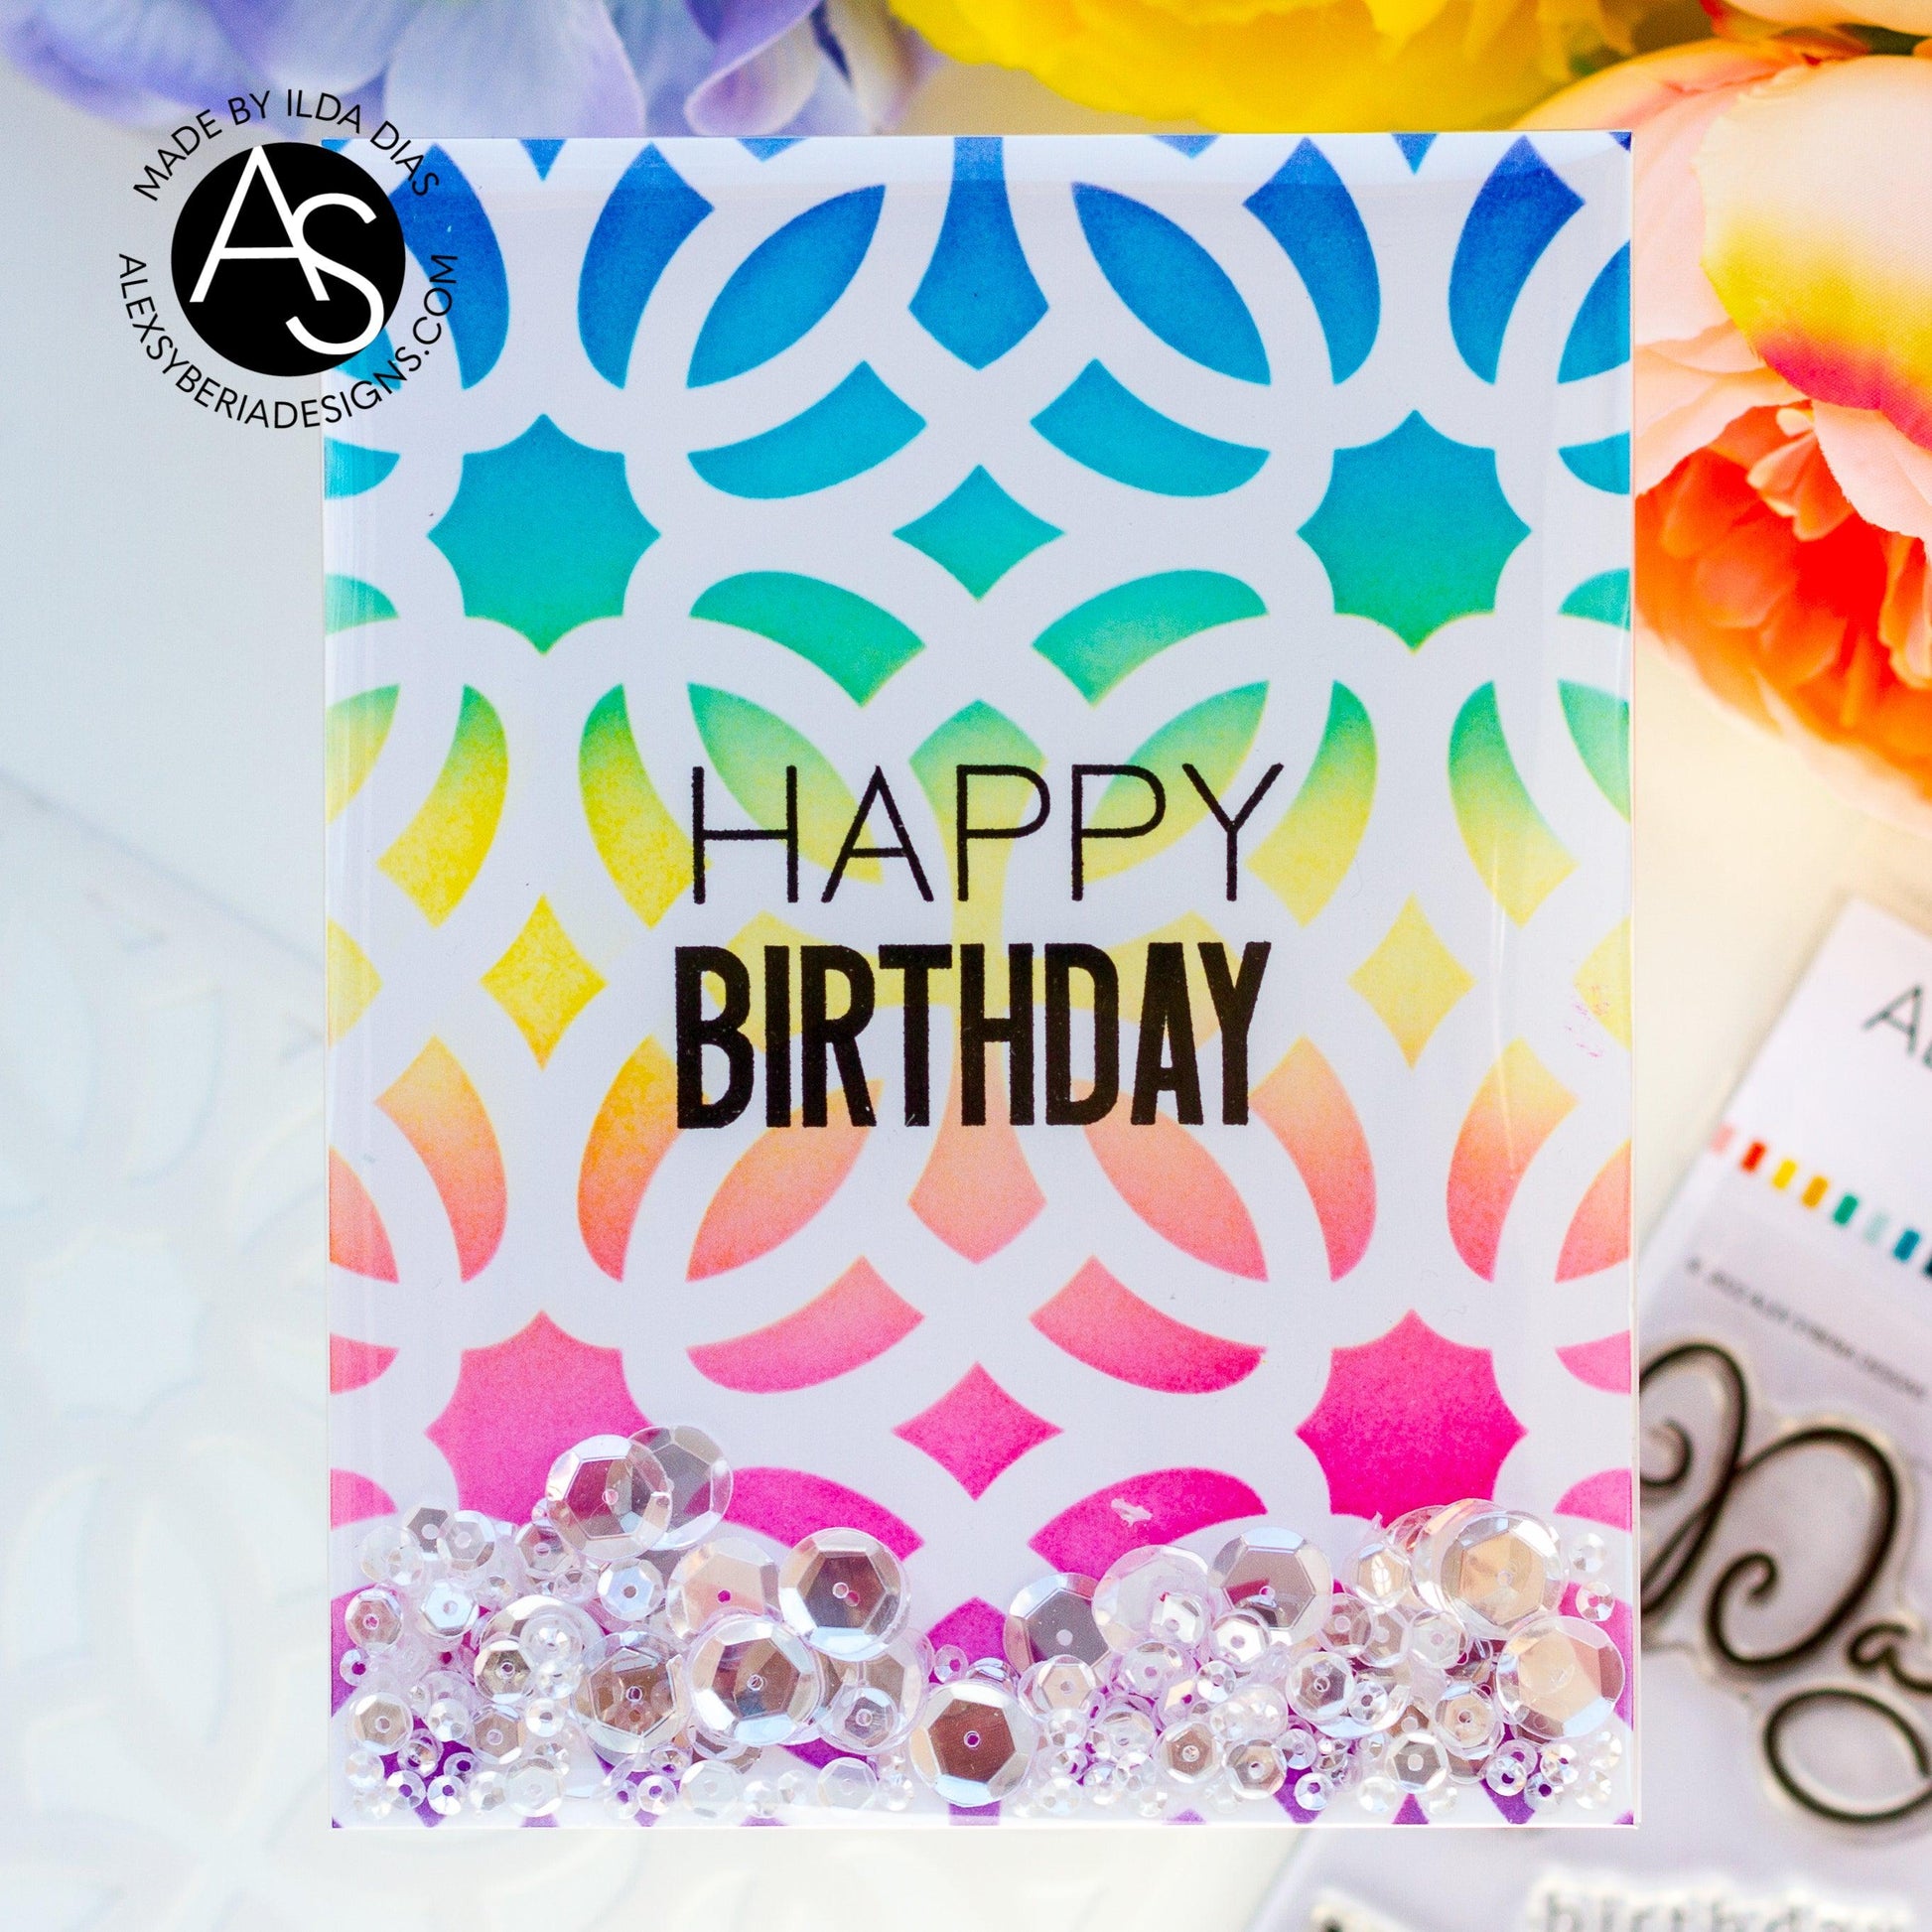 alex-syberia-designs-birthday-wishes-stamp-set-cardmaking-scrapbooking-birthday-celebrate-your-day-sentiments-shaker-cards-cardmaking-ideas